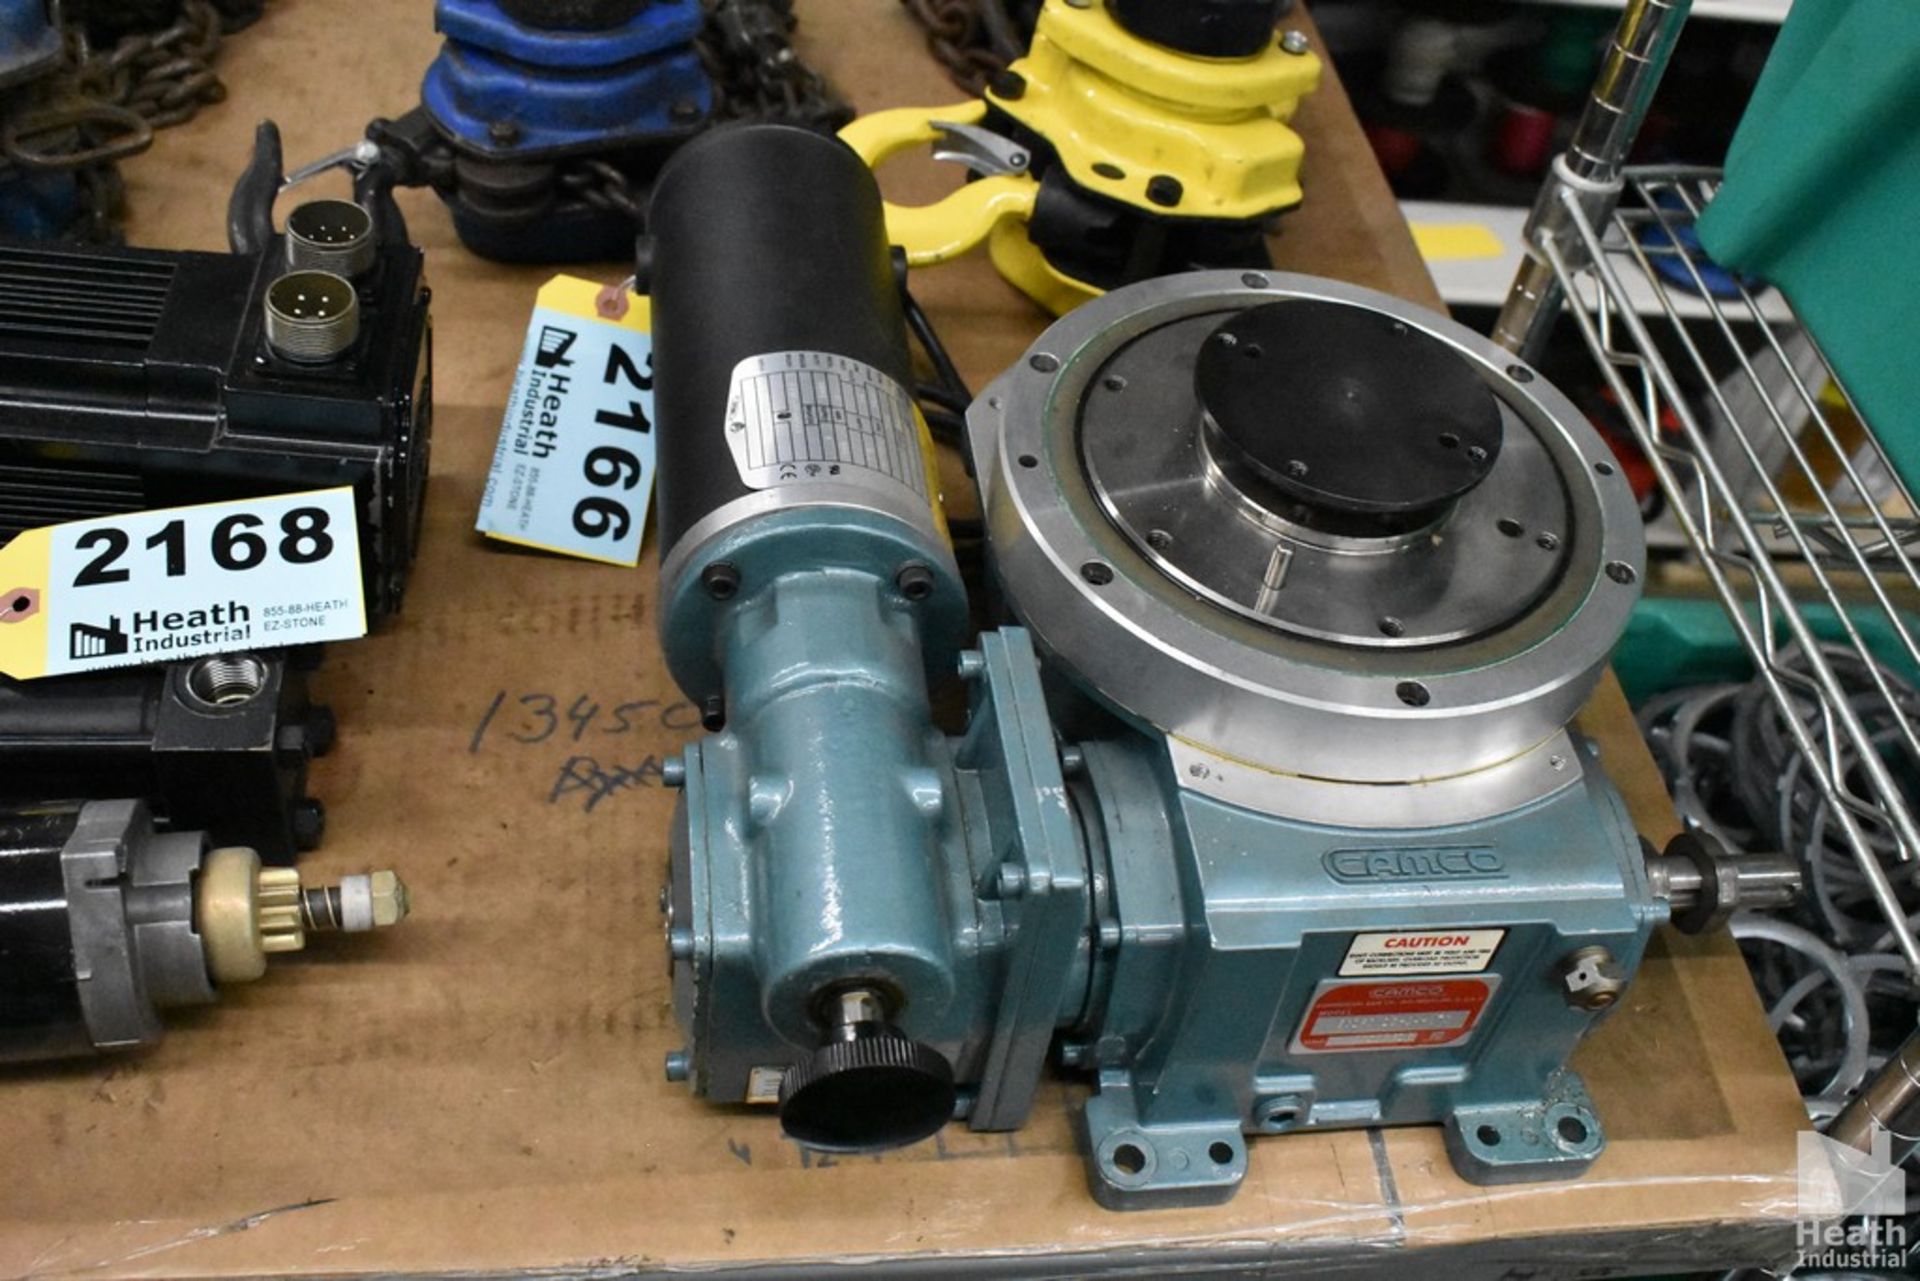 CAMCO ROTARY DRIVE INDEXER MODEL 601PDM12H24-270, WITH CAMO GEAR REDUCER AND BALDOR 1/3HP, 90